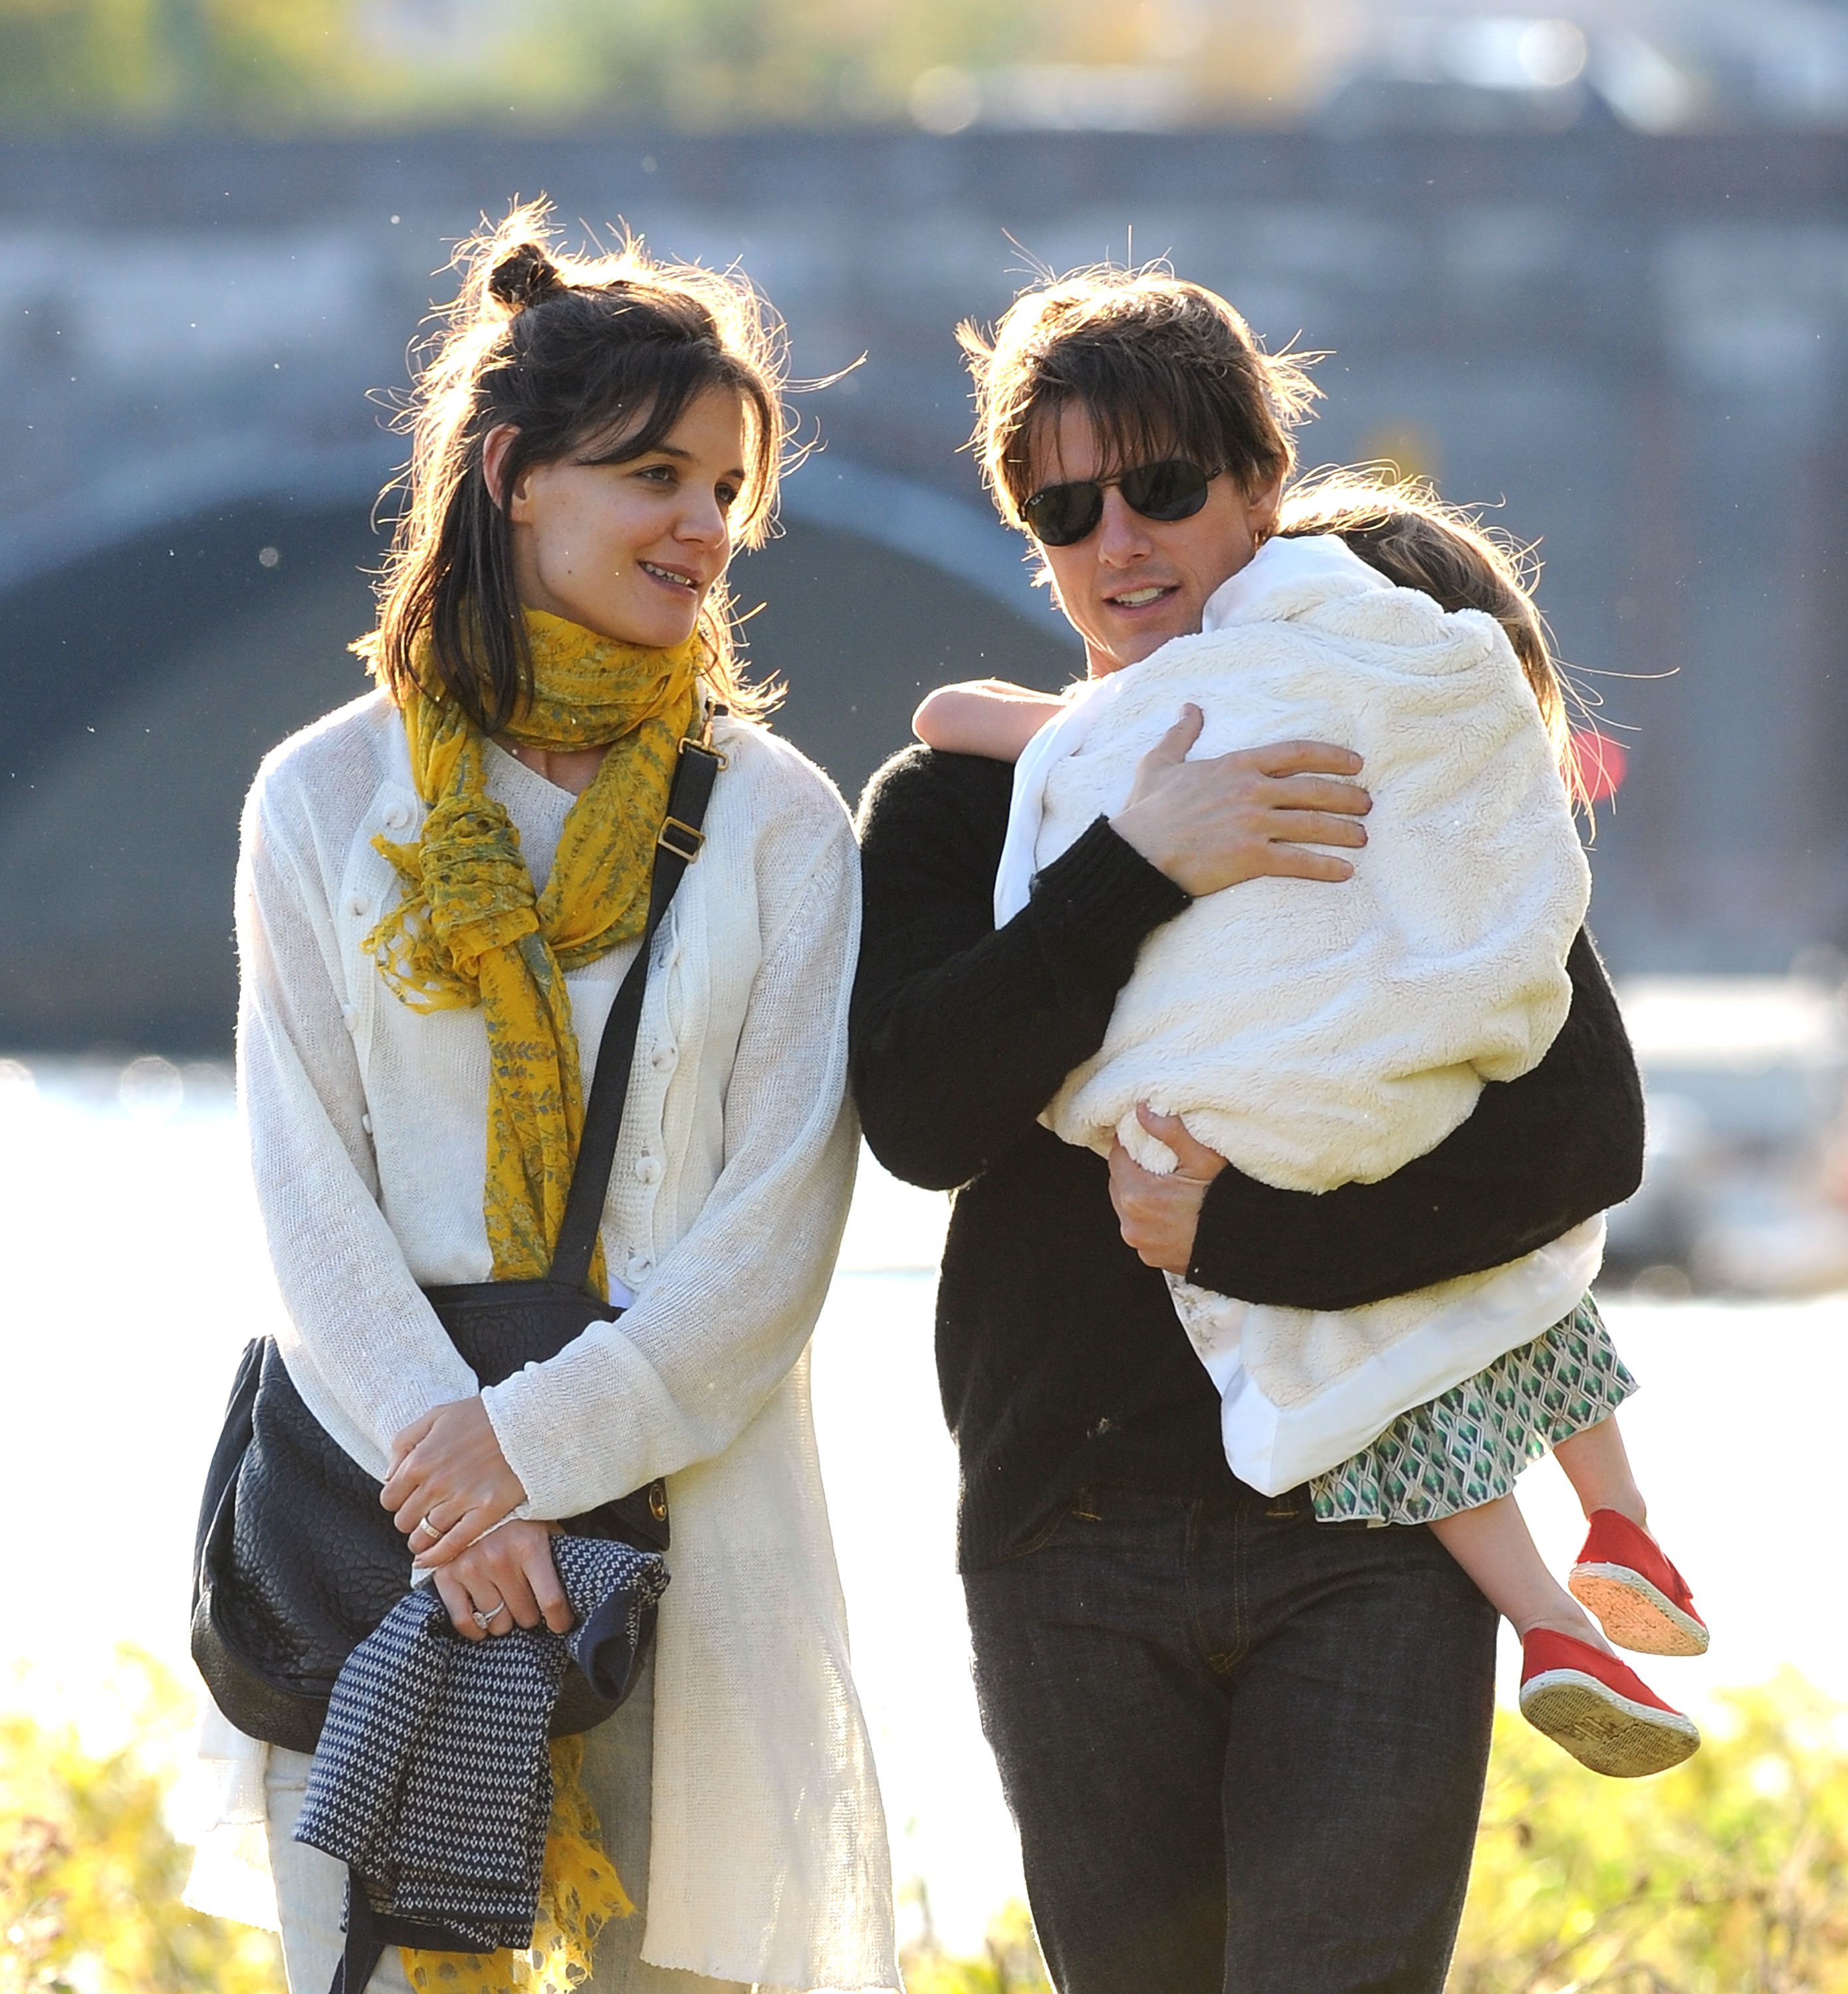 Katie Holmes, Tom Cruise, and their daughter Suri Cruise on October 10, 2009 in Cambridge, Massachusetts | Source: Getty Images